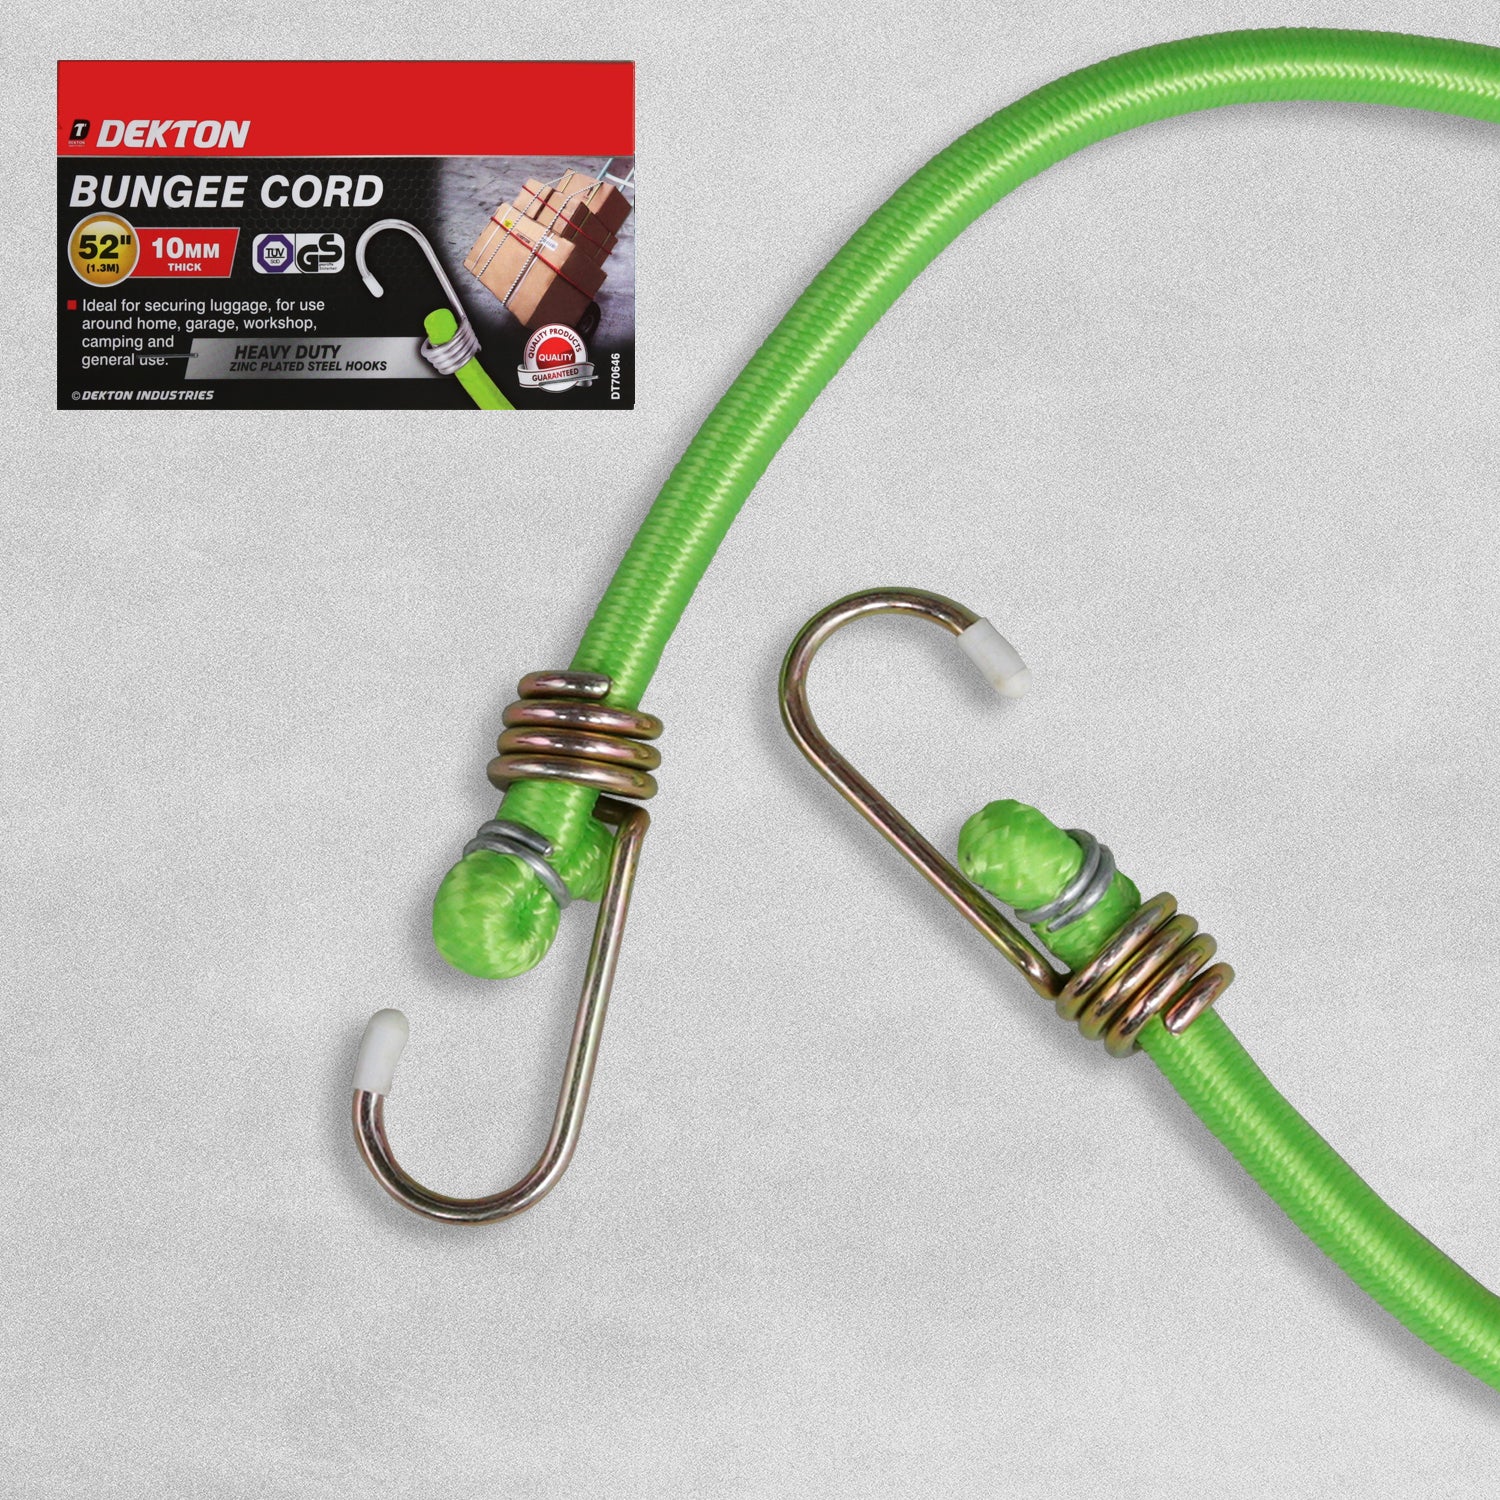 Dekton 52" 10mm Thick Bungee Cord With Zinc Plated Steel Hooks